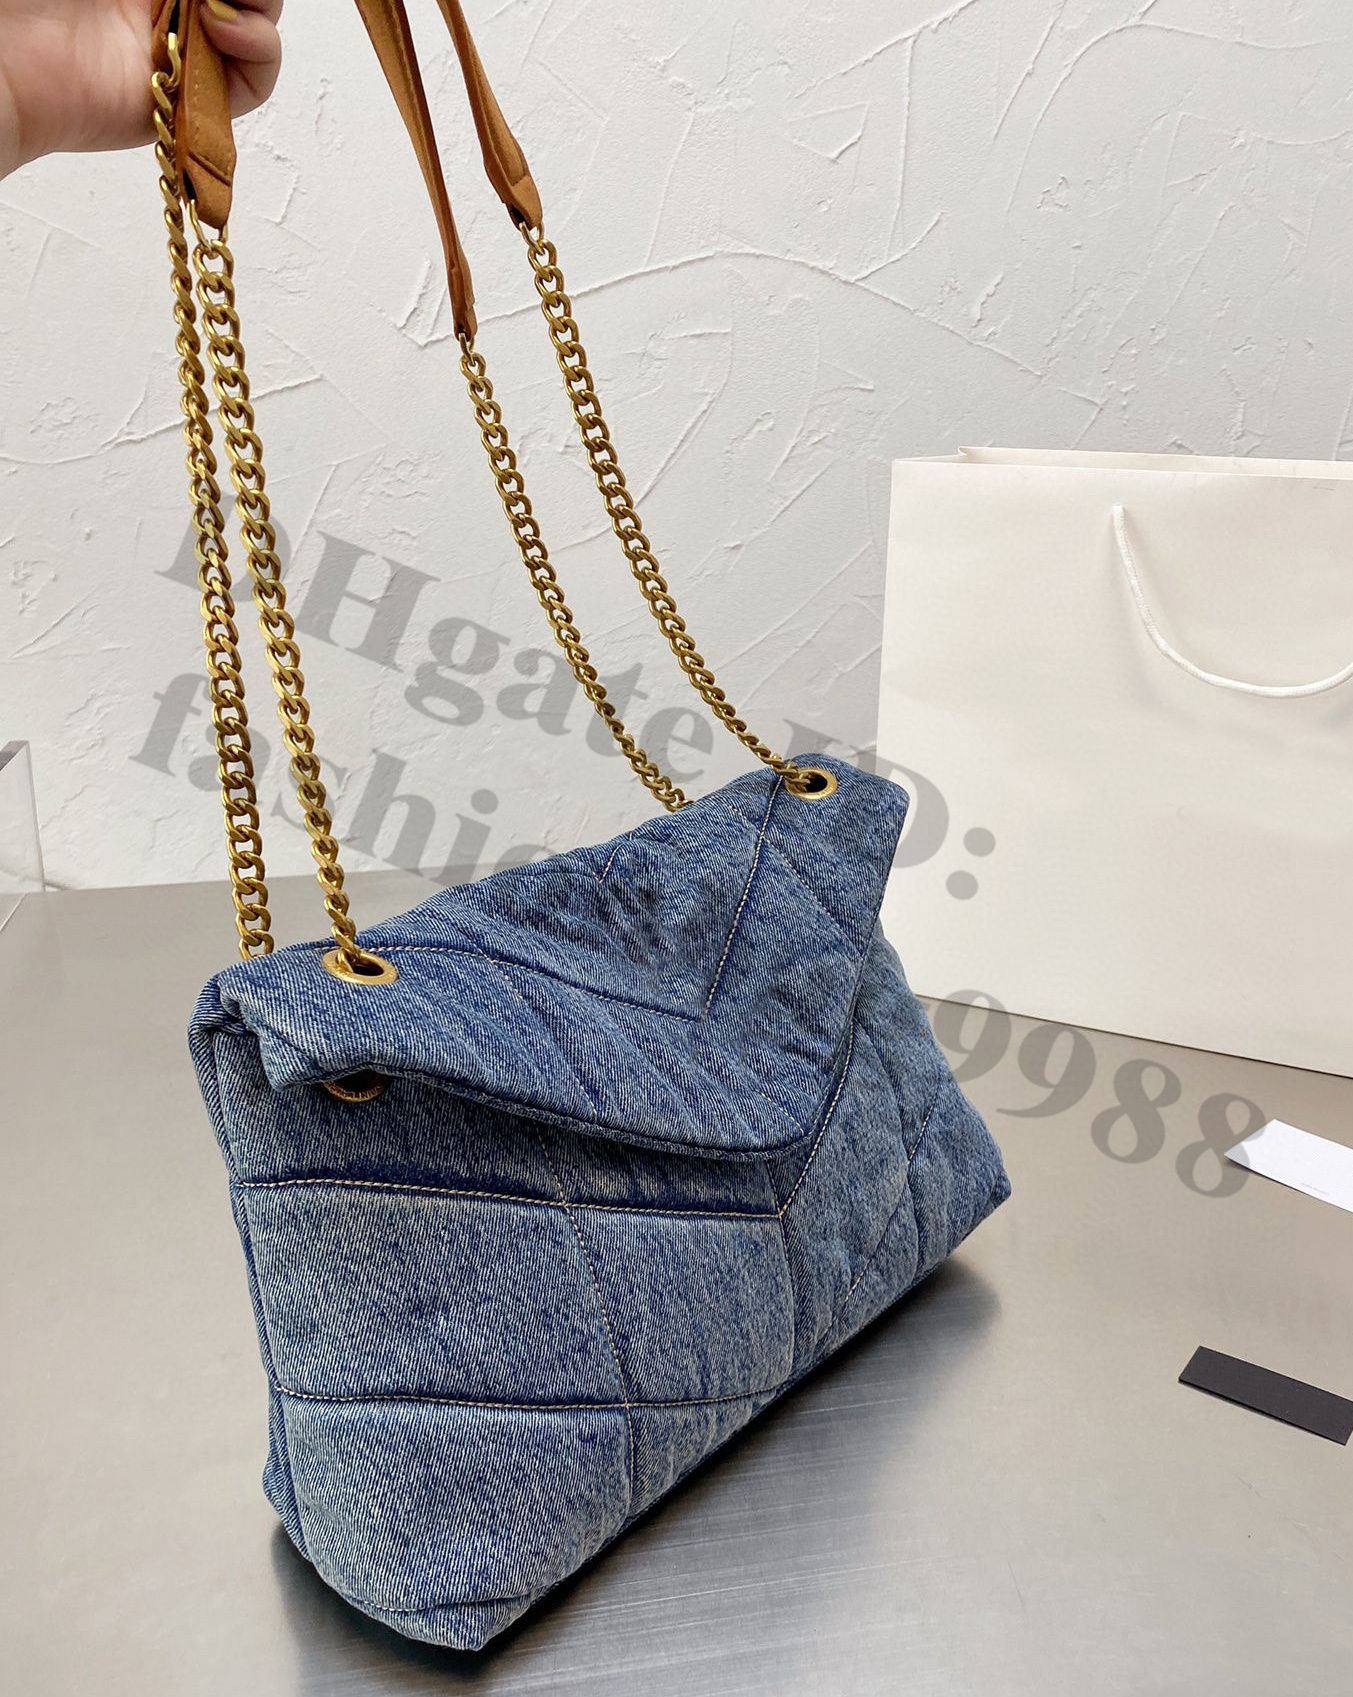 Givenchy Bag Small Moon Cut Out in Washed Denim with Chain Medium